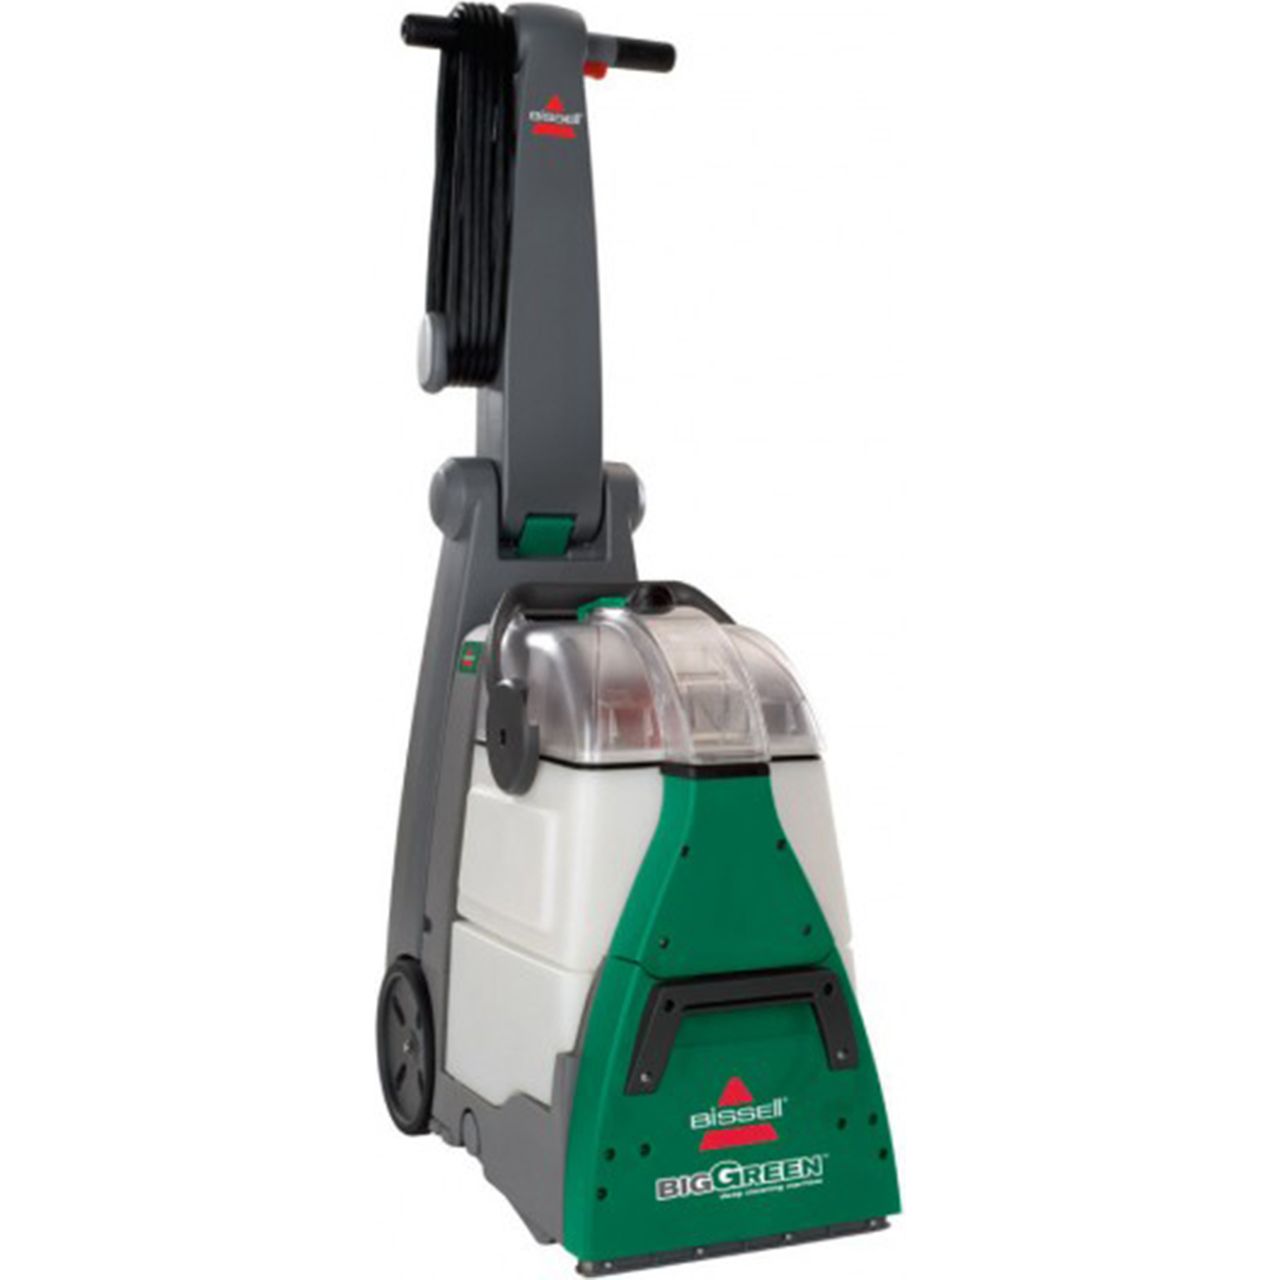 Bissell Big Green™ Deep Cleaning Machine 48F3ER Carpet Cleaner Review